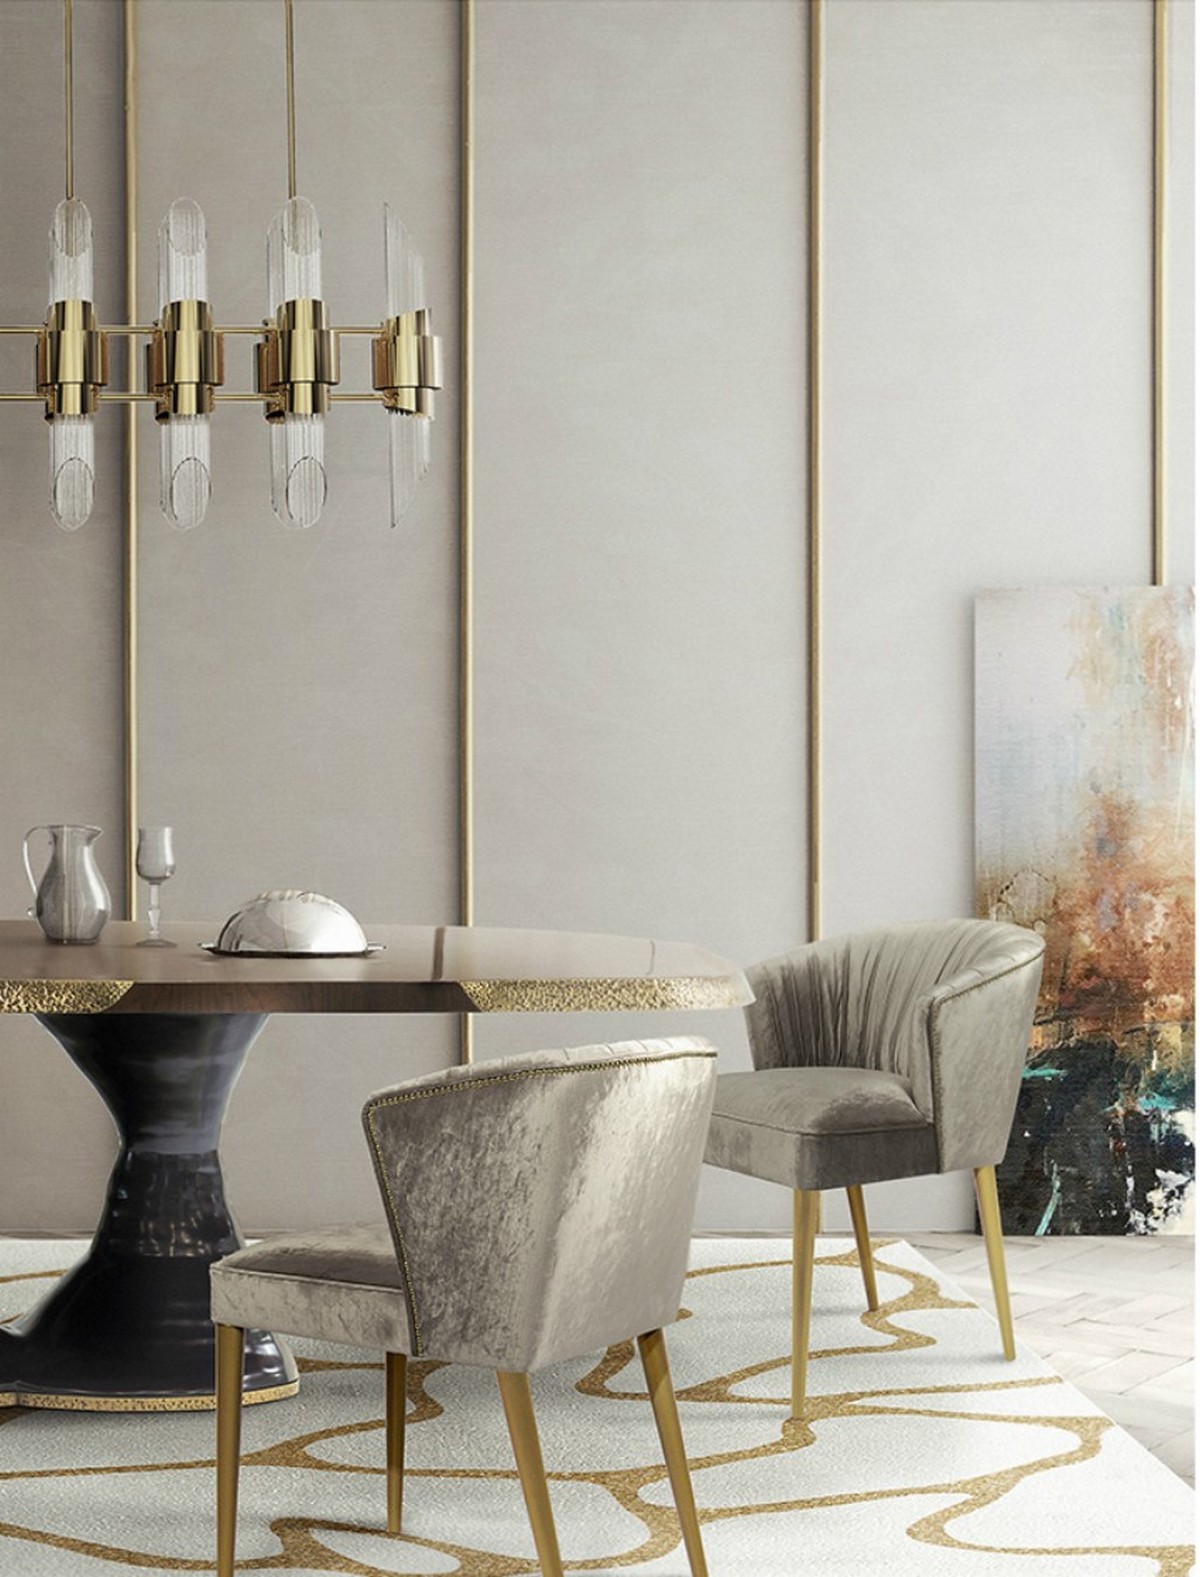 Trendy Dining Chairs For 2019 (Part II)